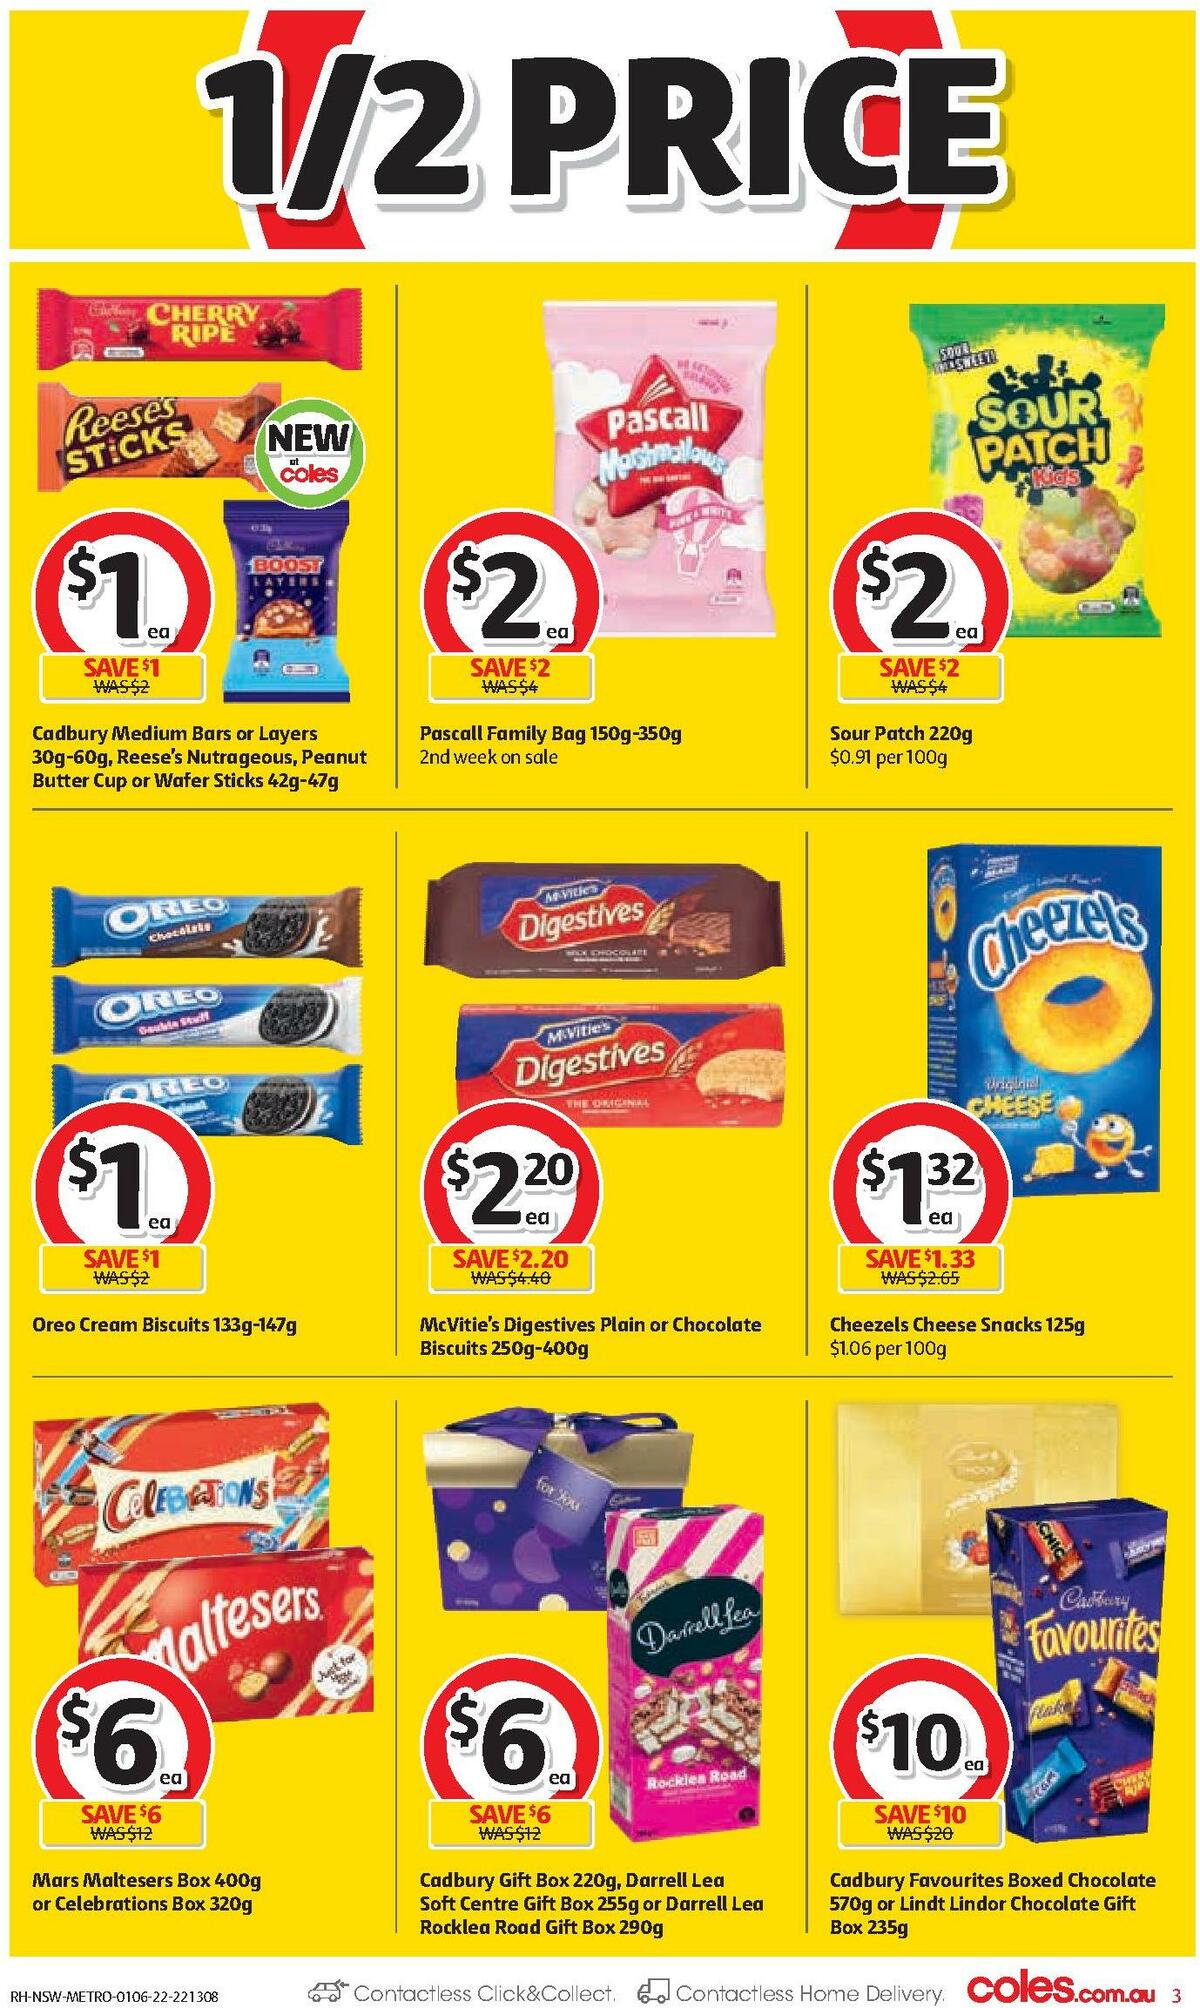 Coles Catalogues from 1 June